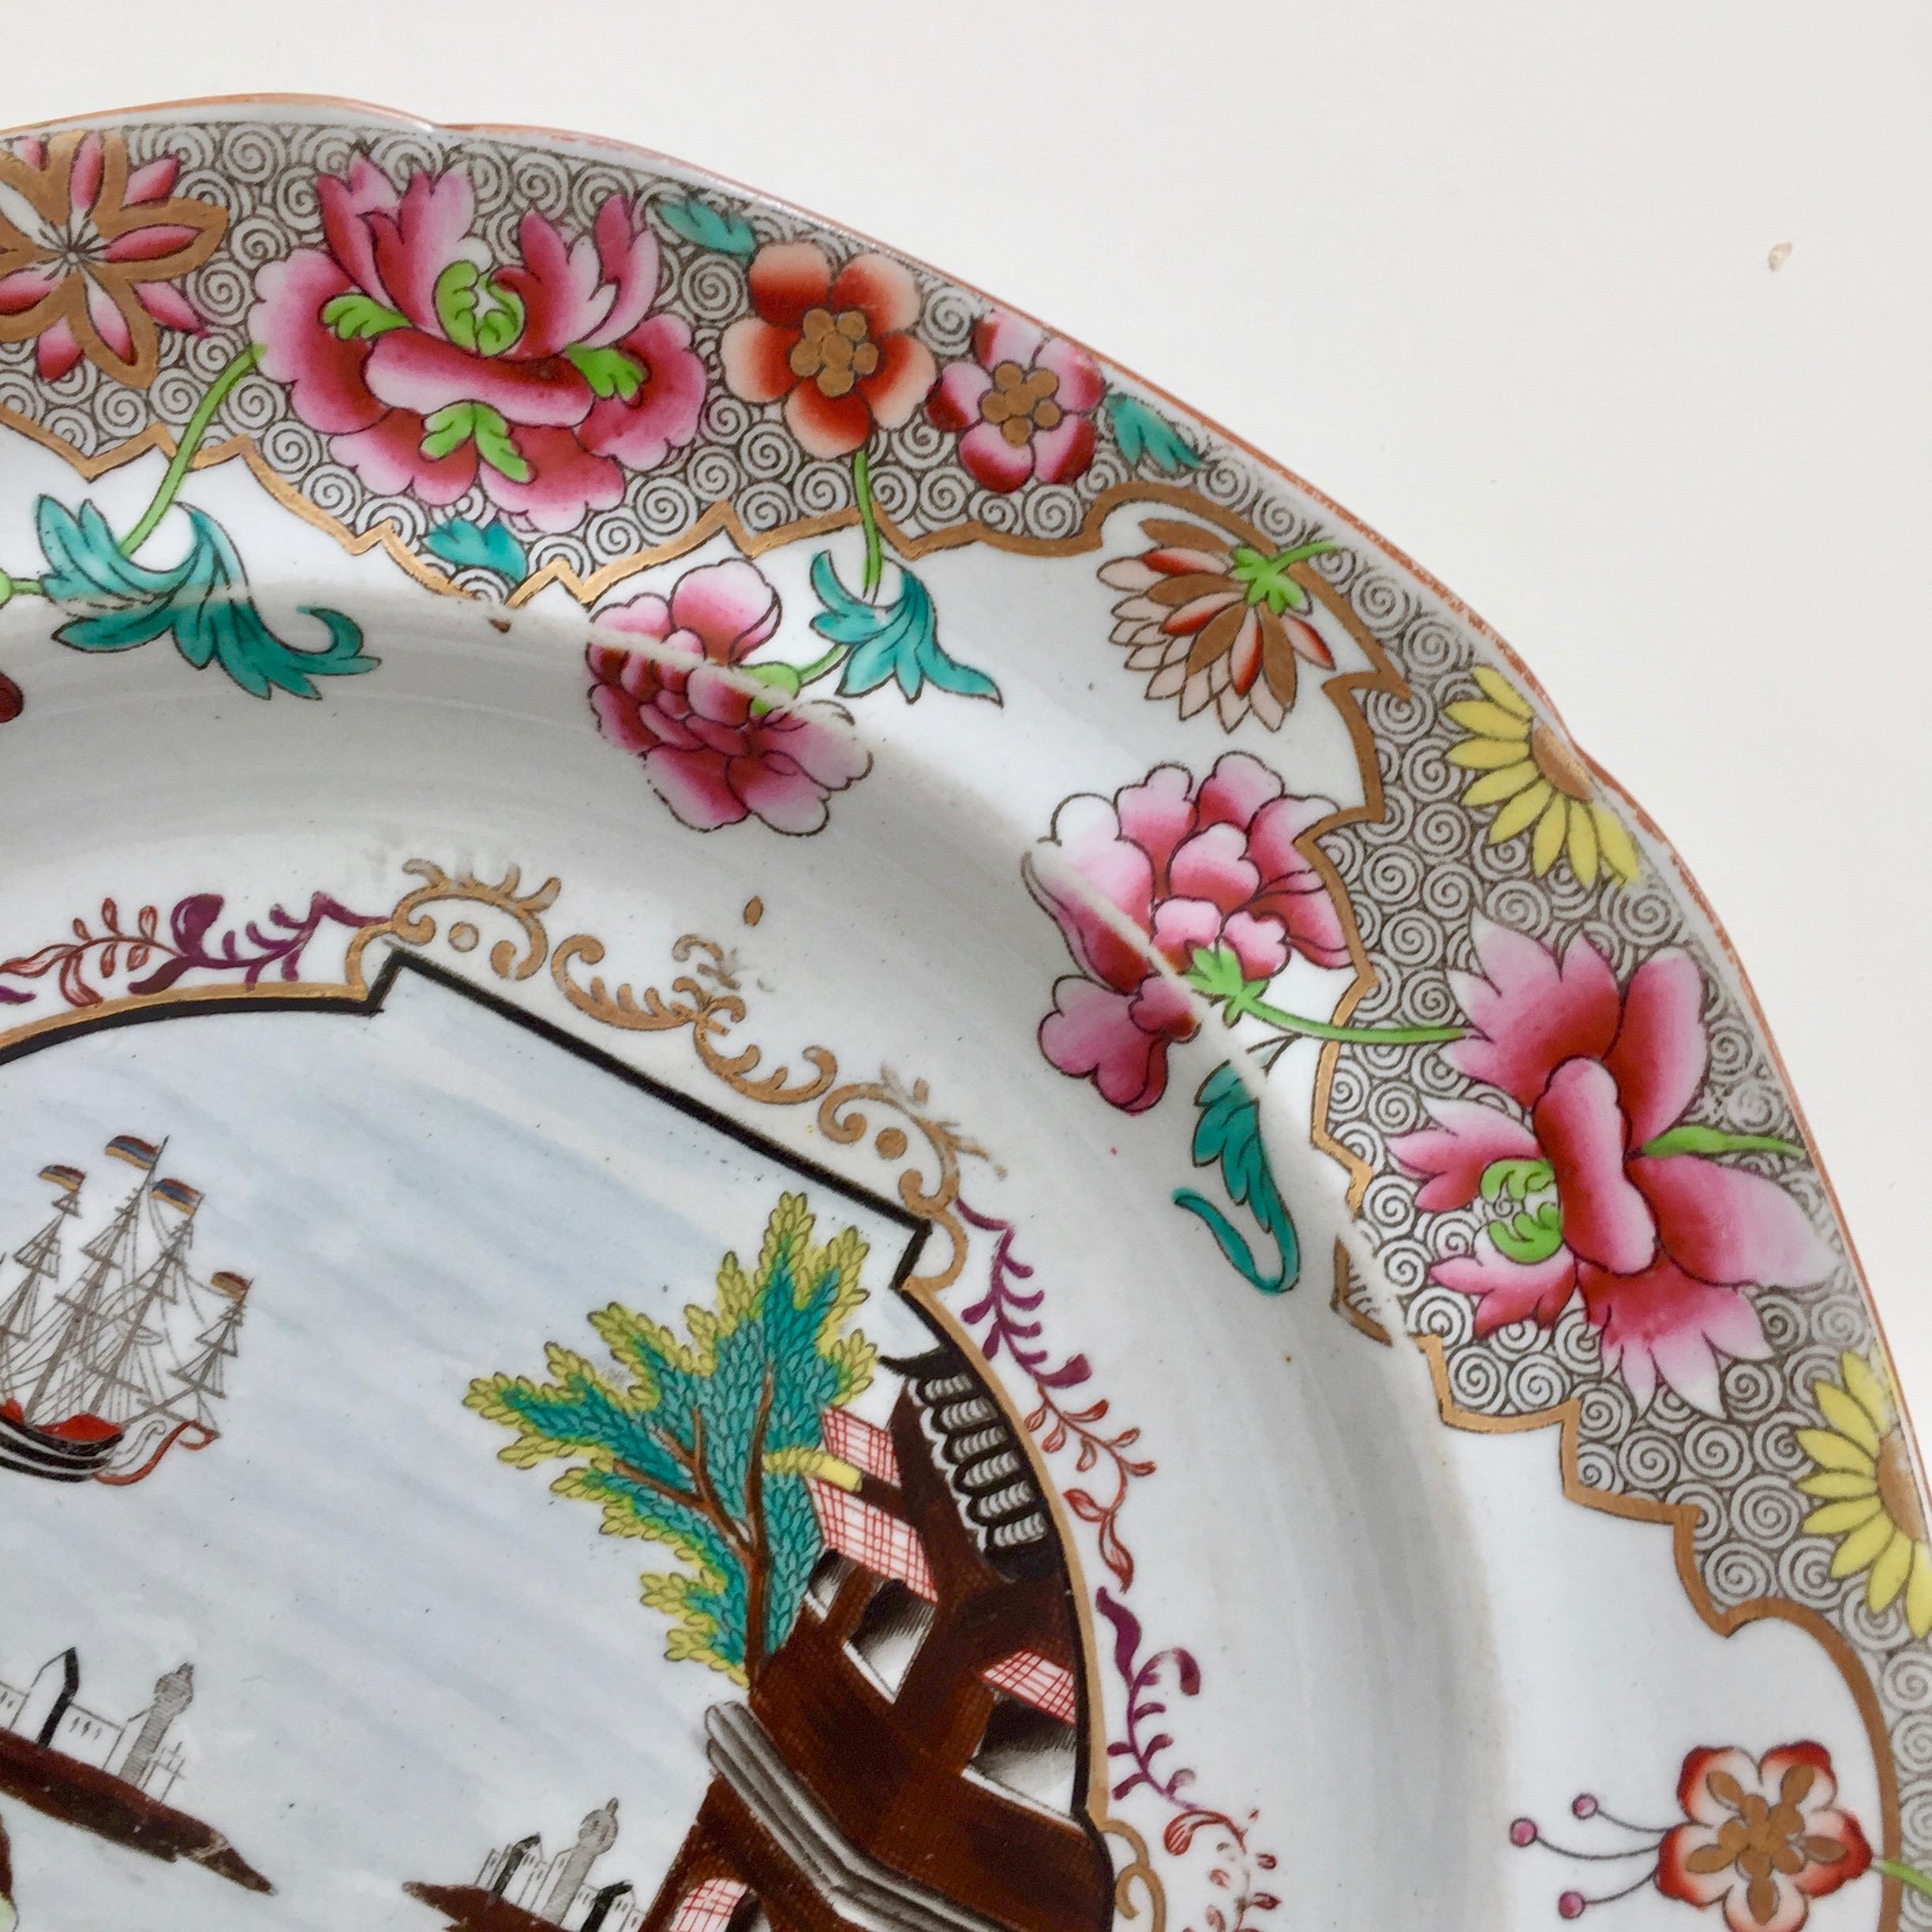 Early 19th Century Spode Stone China Plate with Chinoiserie Ship Pattern, Regency, 1812-1833